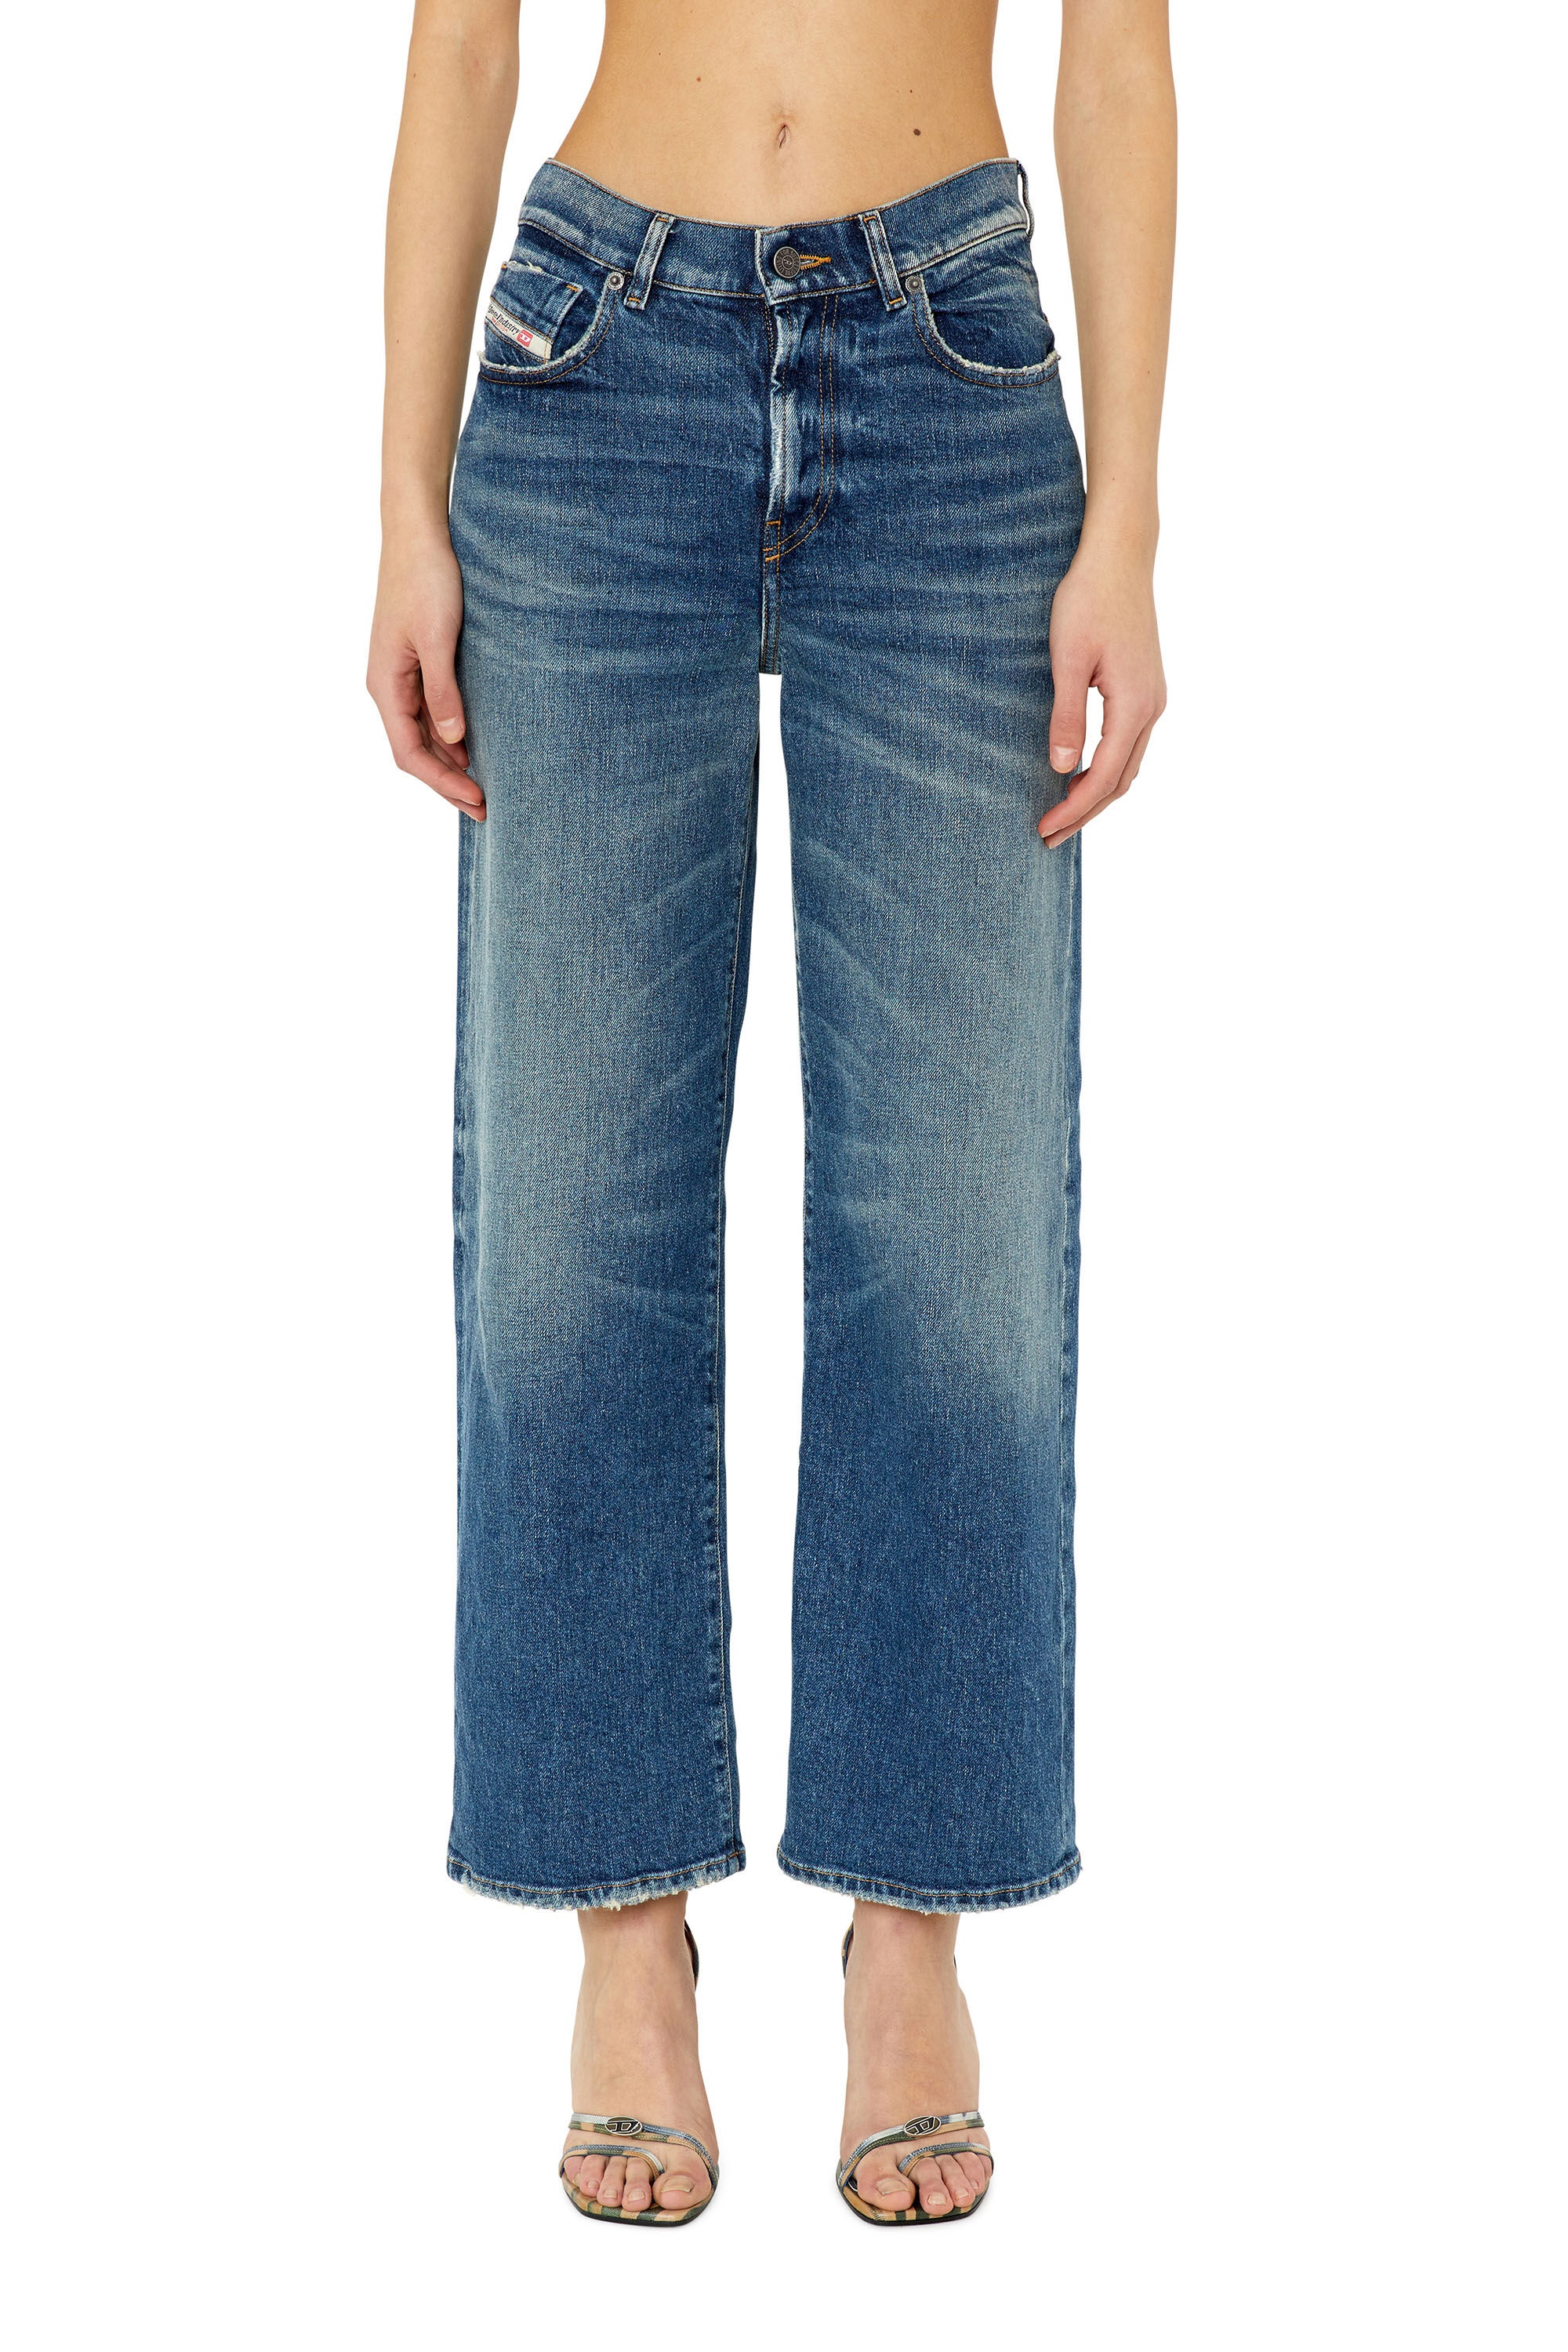 2000 WIDEE 007L1 BOOTCUT AND FLARE JEANS - 3